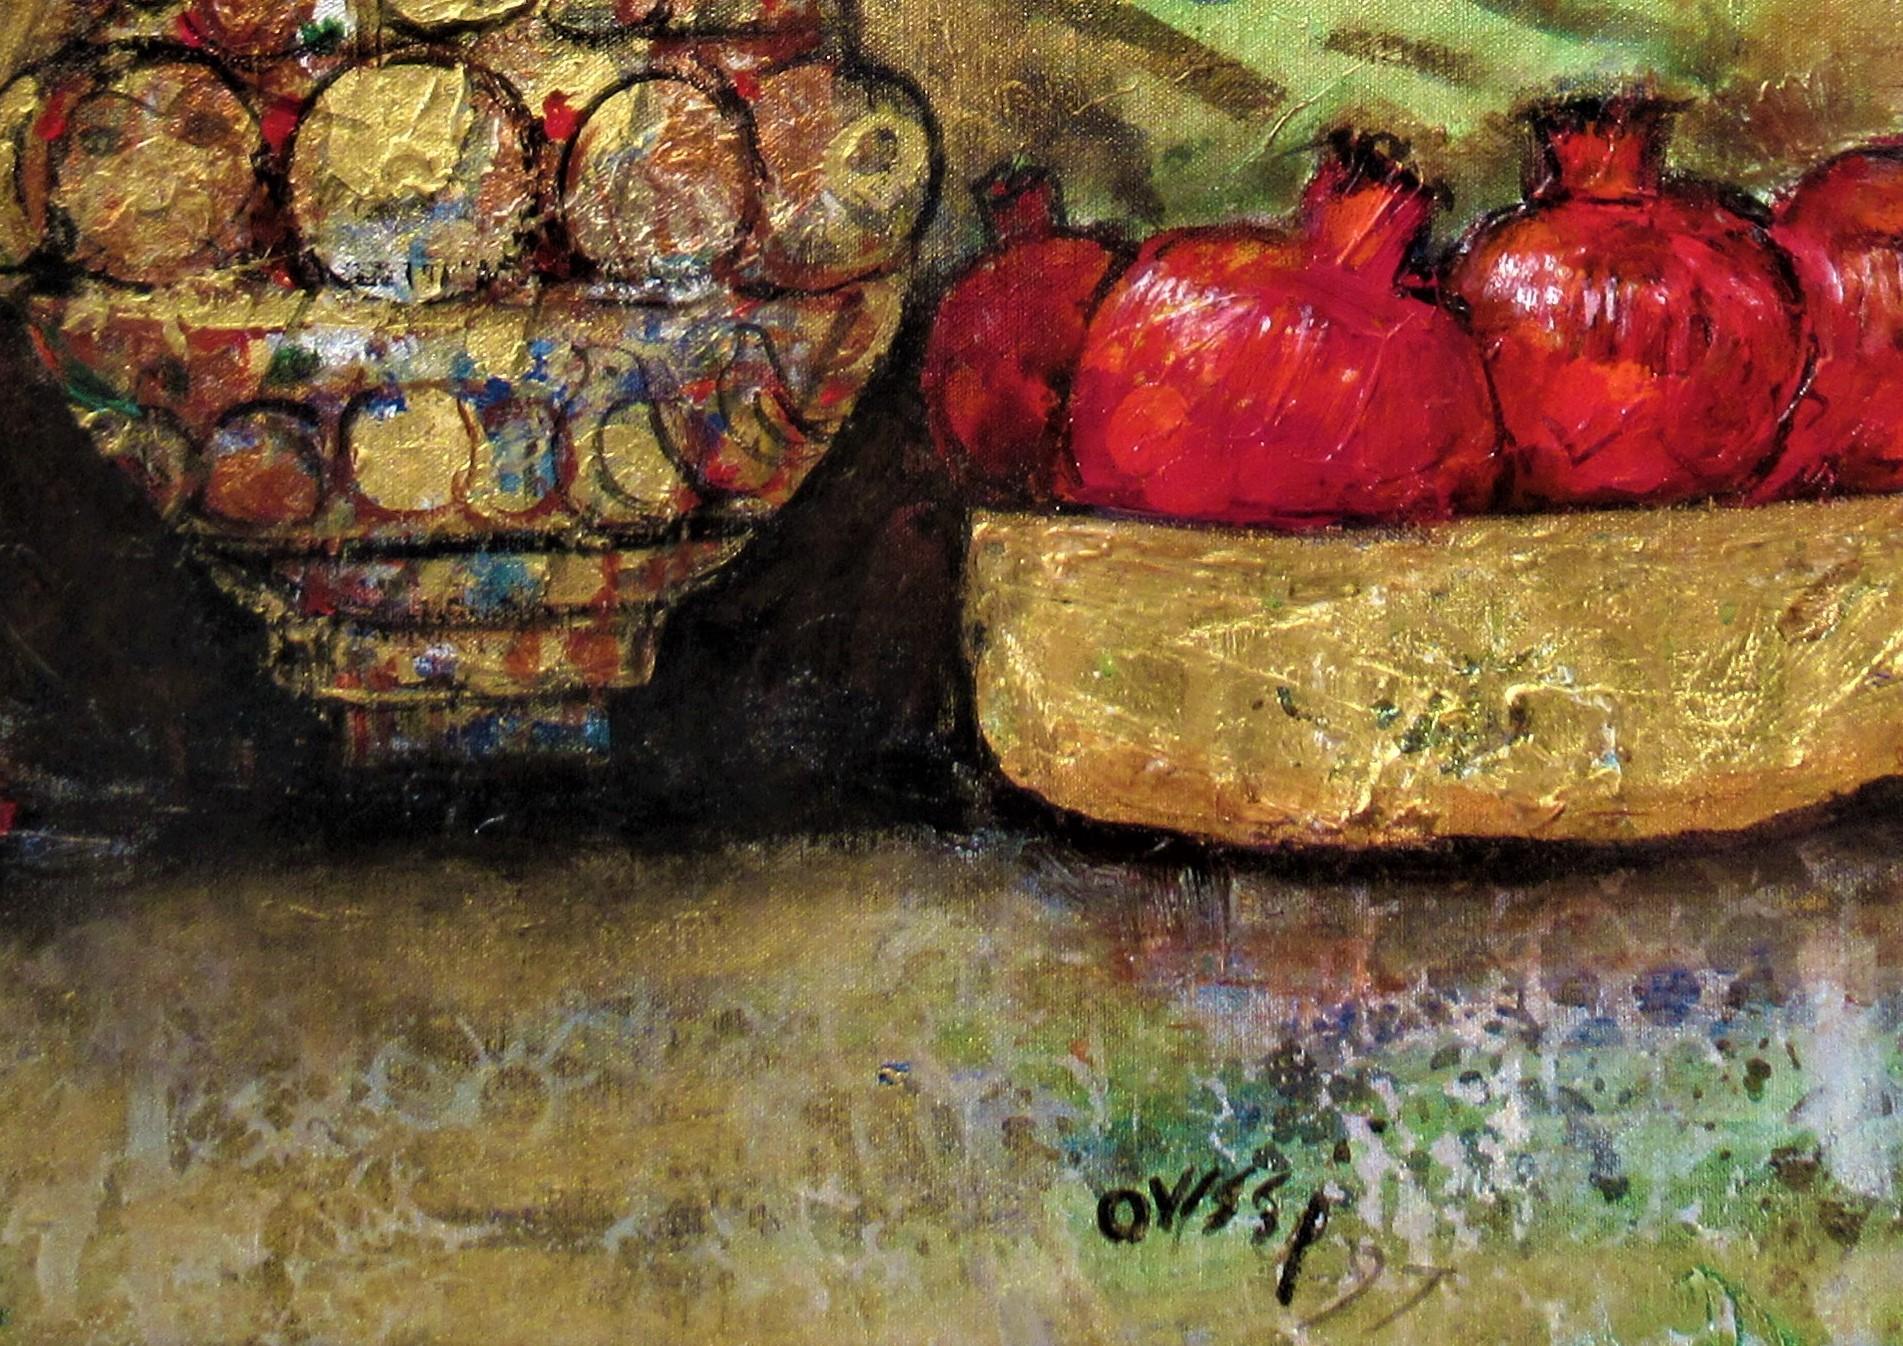 Pomegranates with Antique Vase - Brown Figurative Painting by Nasser Ovissi